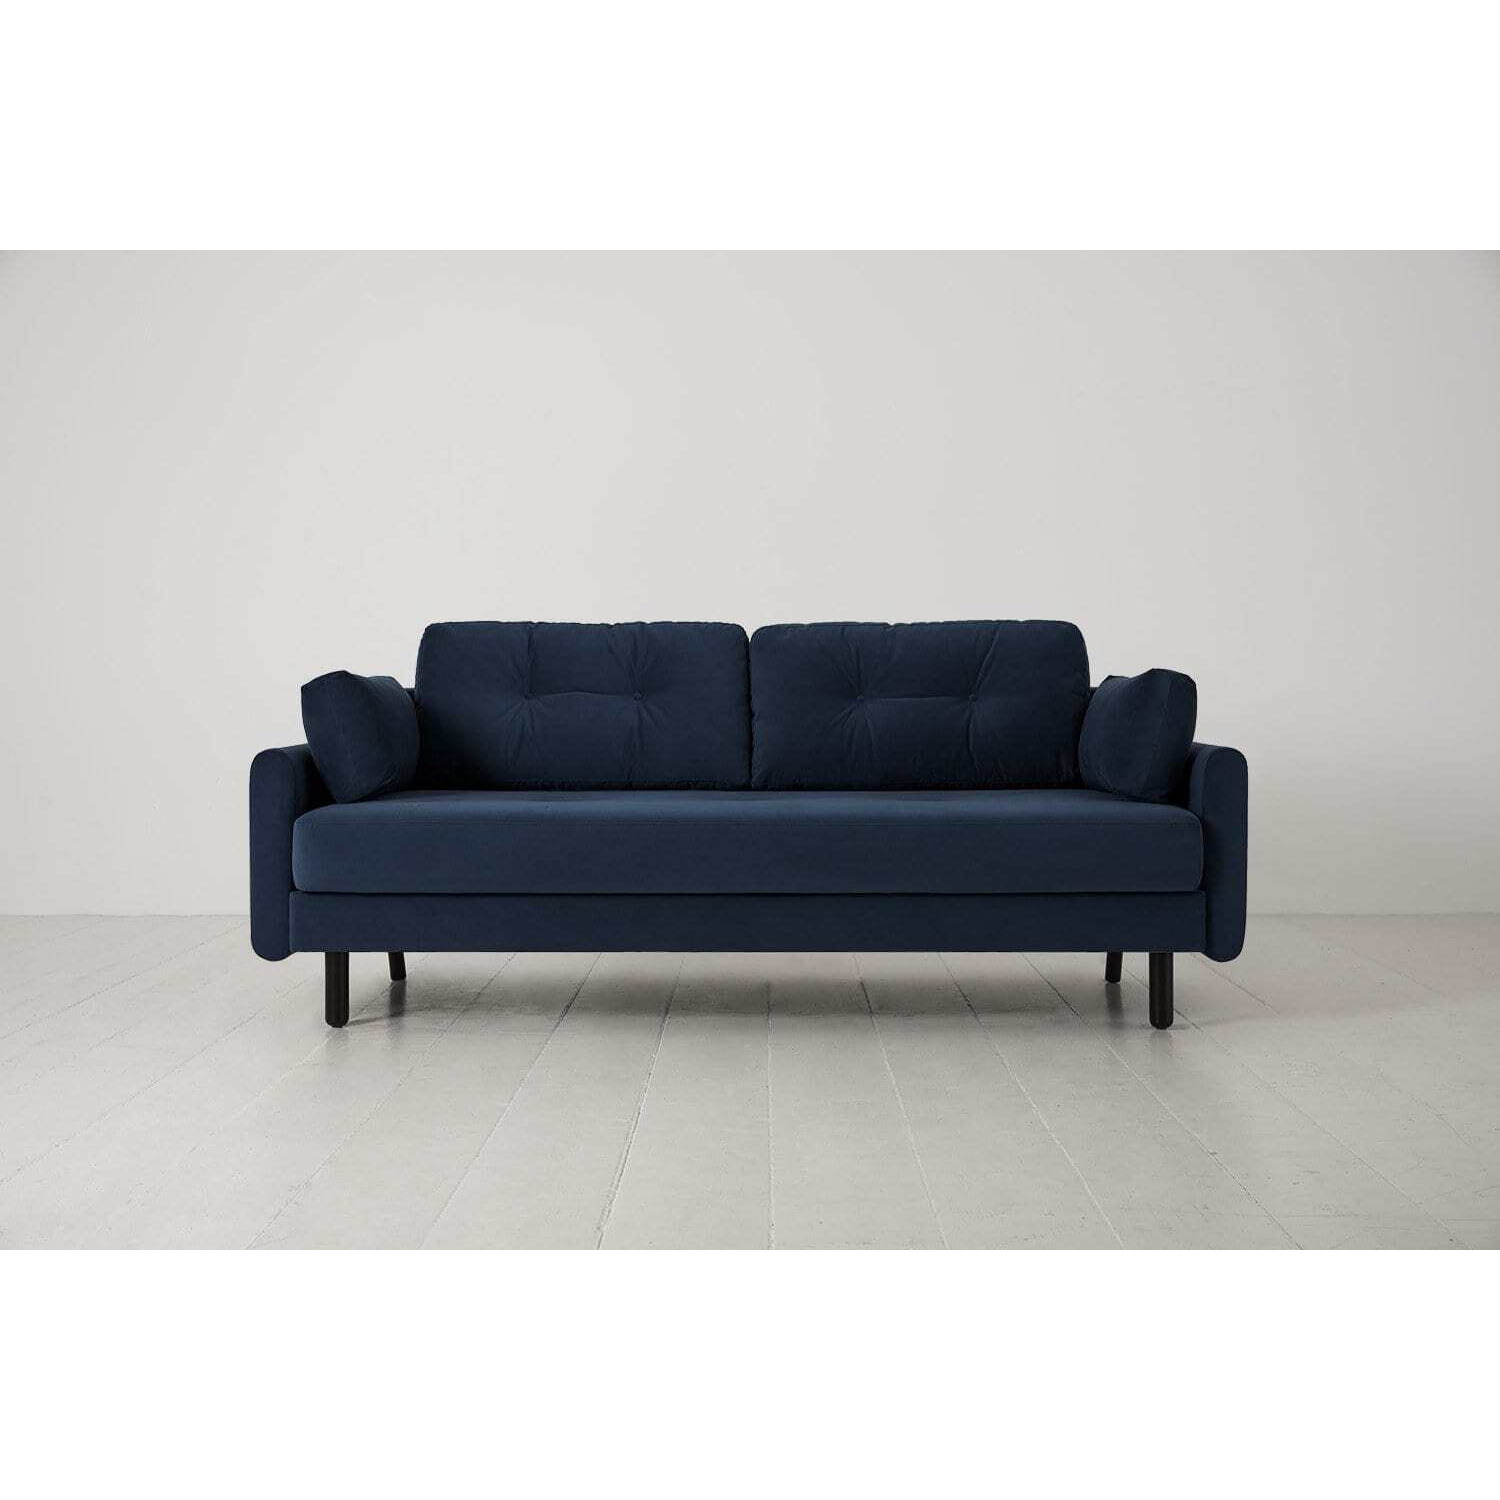 Velvet 3 Seater Sofa Bed from Swyft - Teal - Model 04 - Next Day Delivery